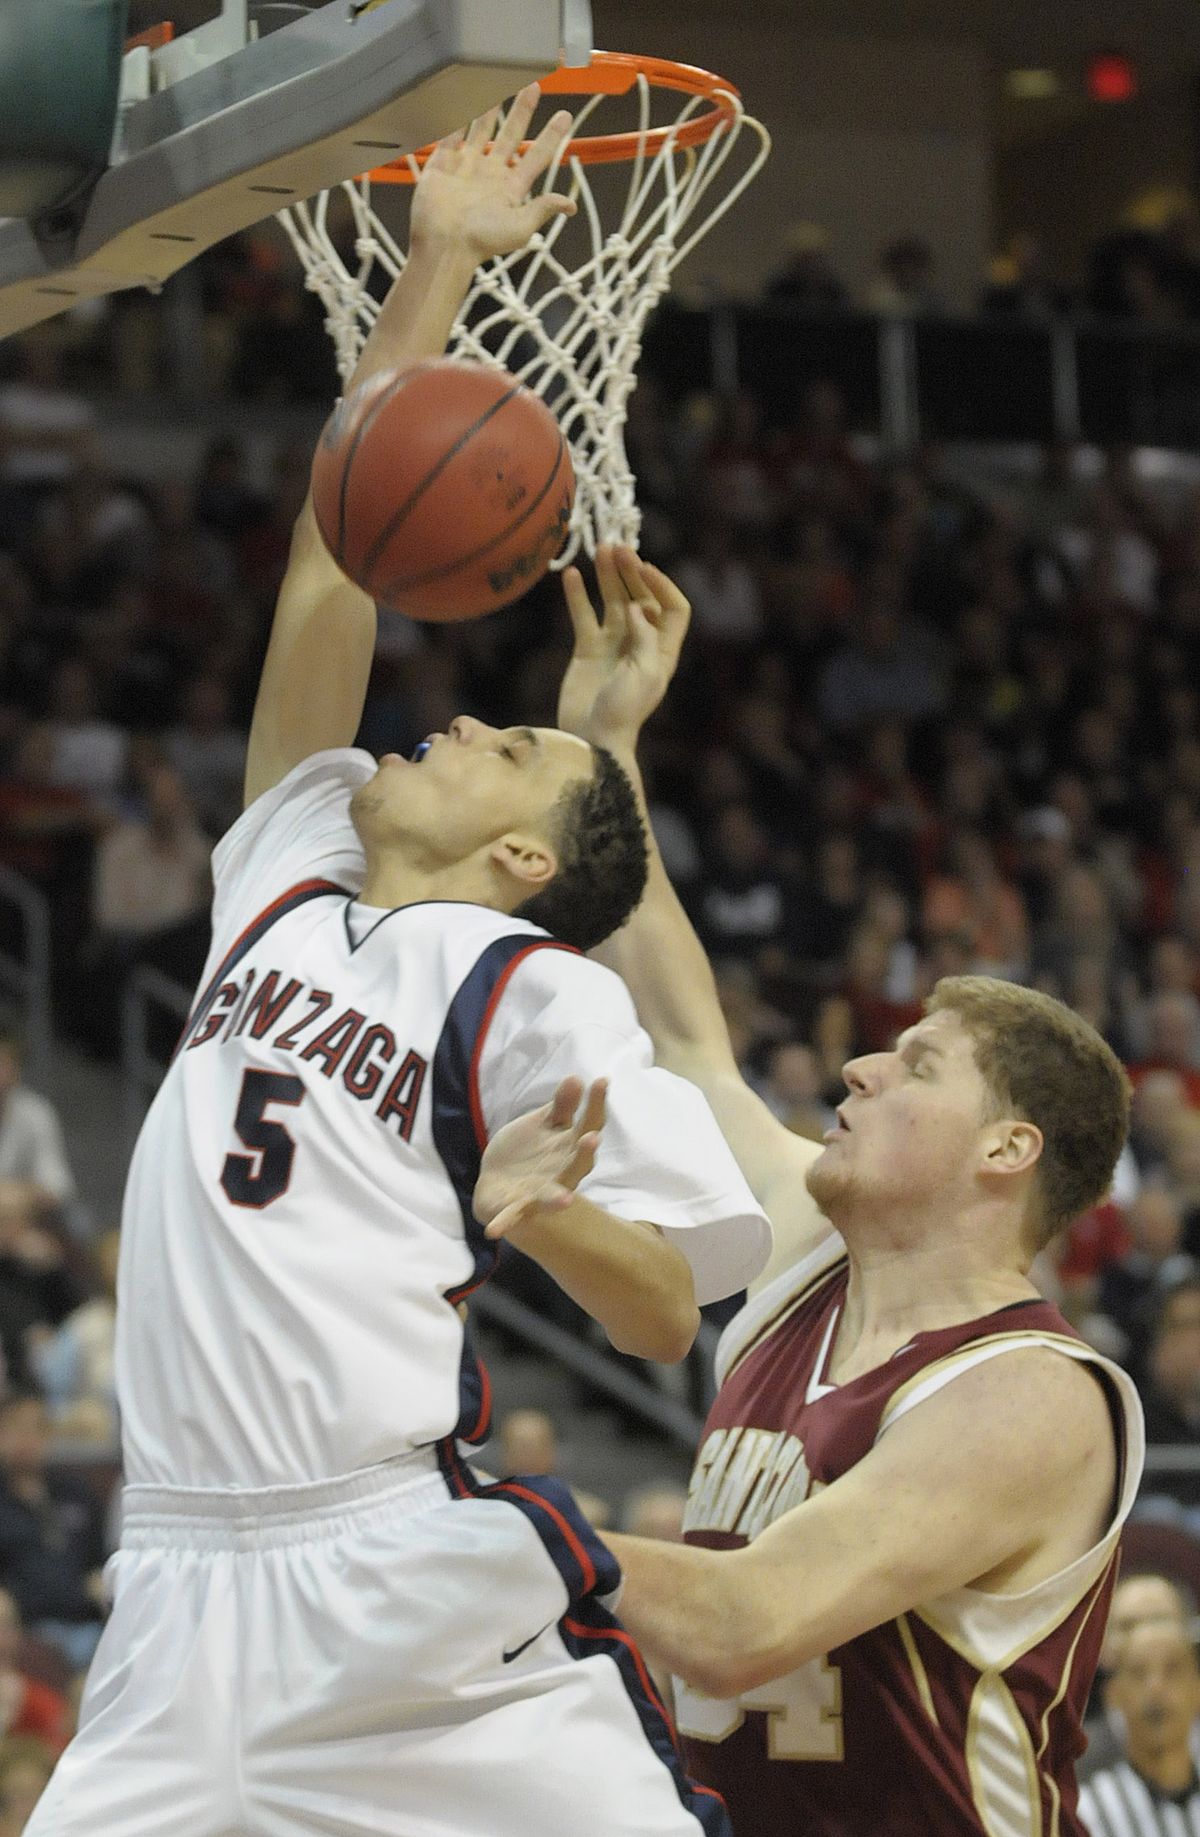 Austin Daye of Gonzaga is fouled as he goes strong to the basket against John Bryant of Santa Clara on Sunday, March 8, 2009, during their semifinal game in the WCC Tournament in Las Vegas. Gonzaga advanced to the championship game Monday night.   (Christopher Anderson / The Spokesman-Review)